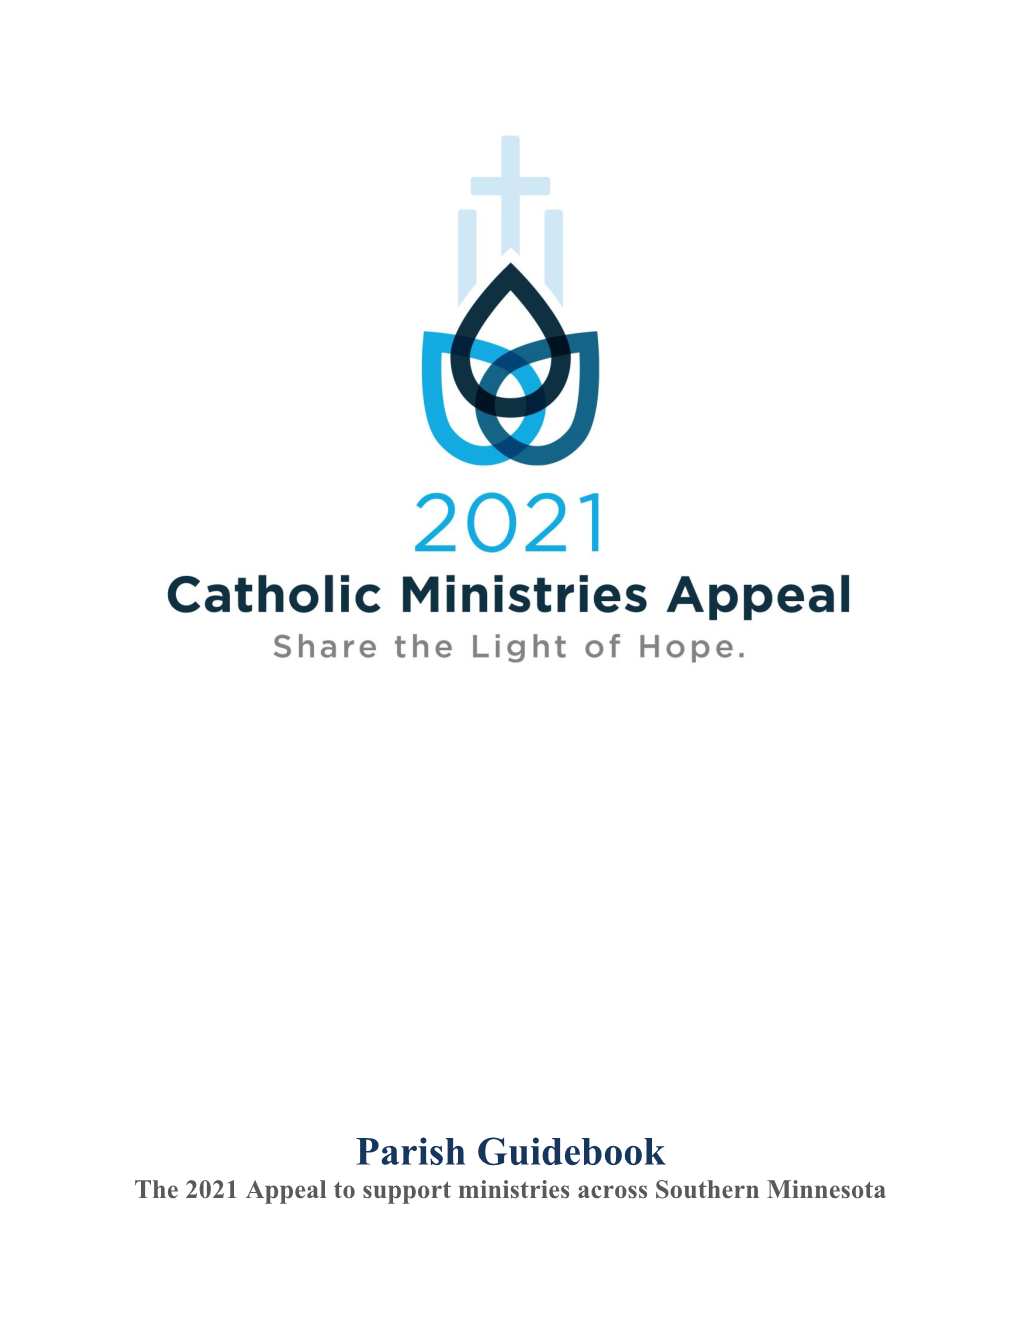 Parish Guidebook the 2021 Appeal to Support Ministries Across Southern Minnesota Dear Pastors and Administrators